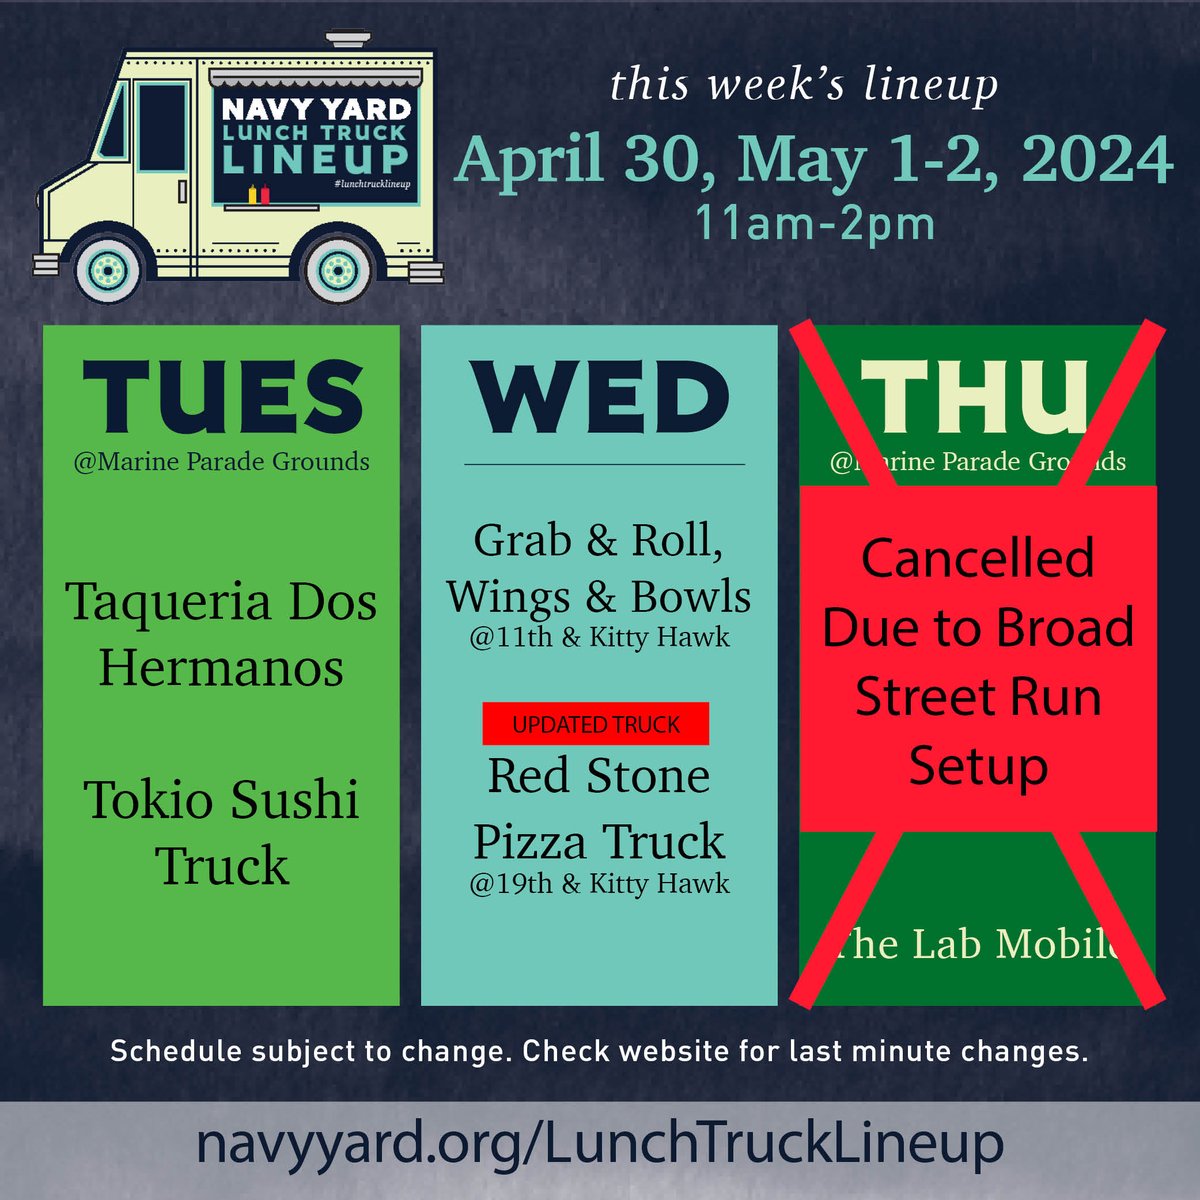 Updates for tomorrow and Thursday! Sorry for the changes. #lunchtrucklineup #discovertheyard #navyyardphilly